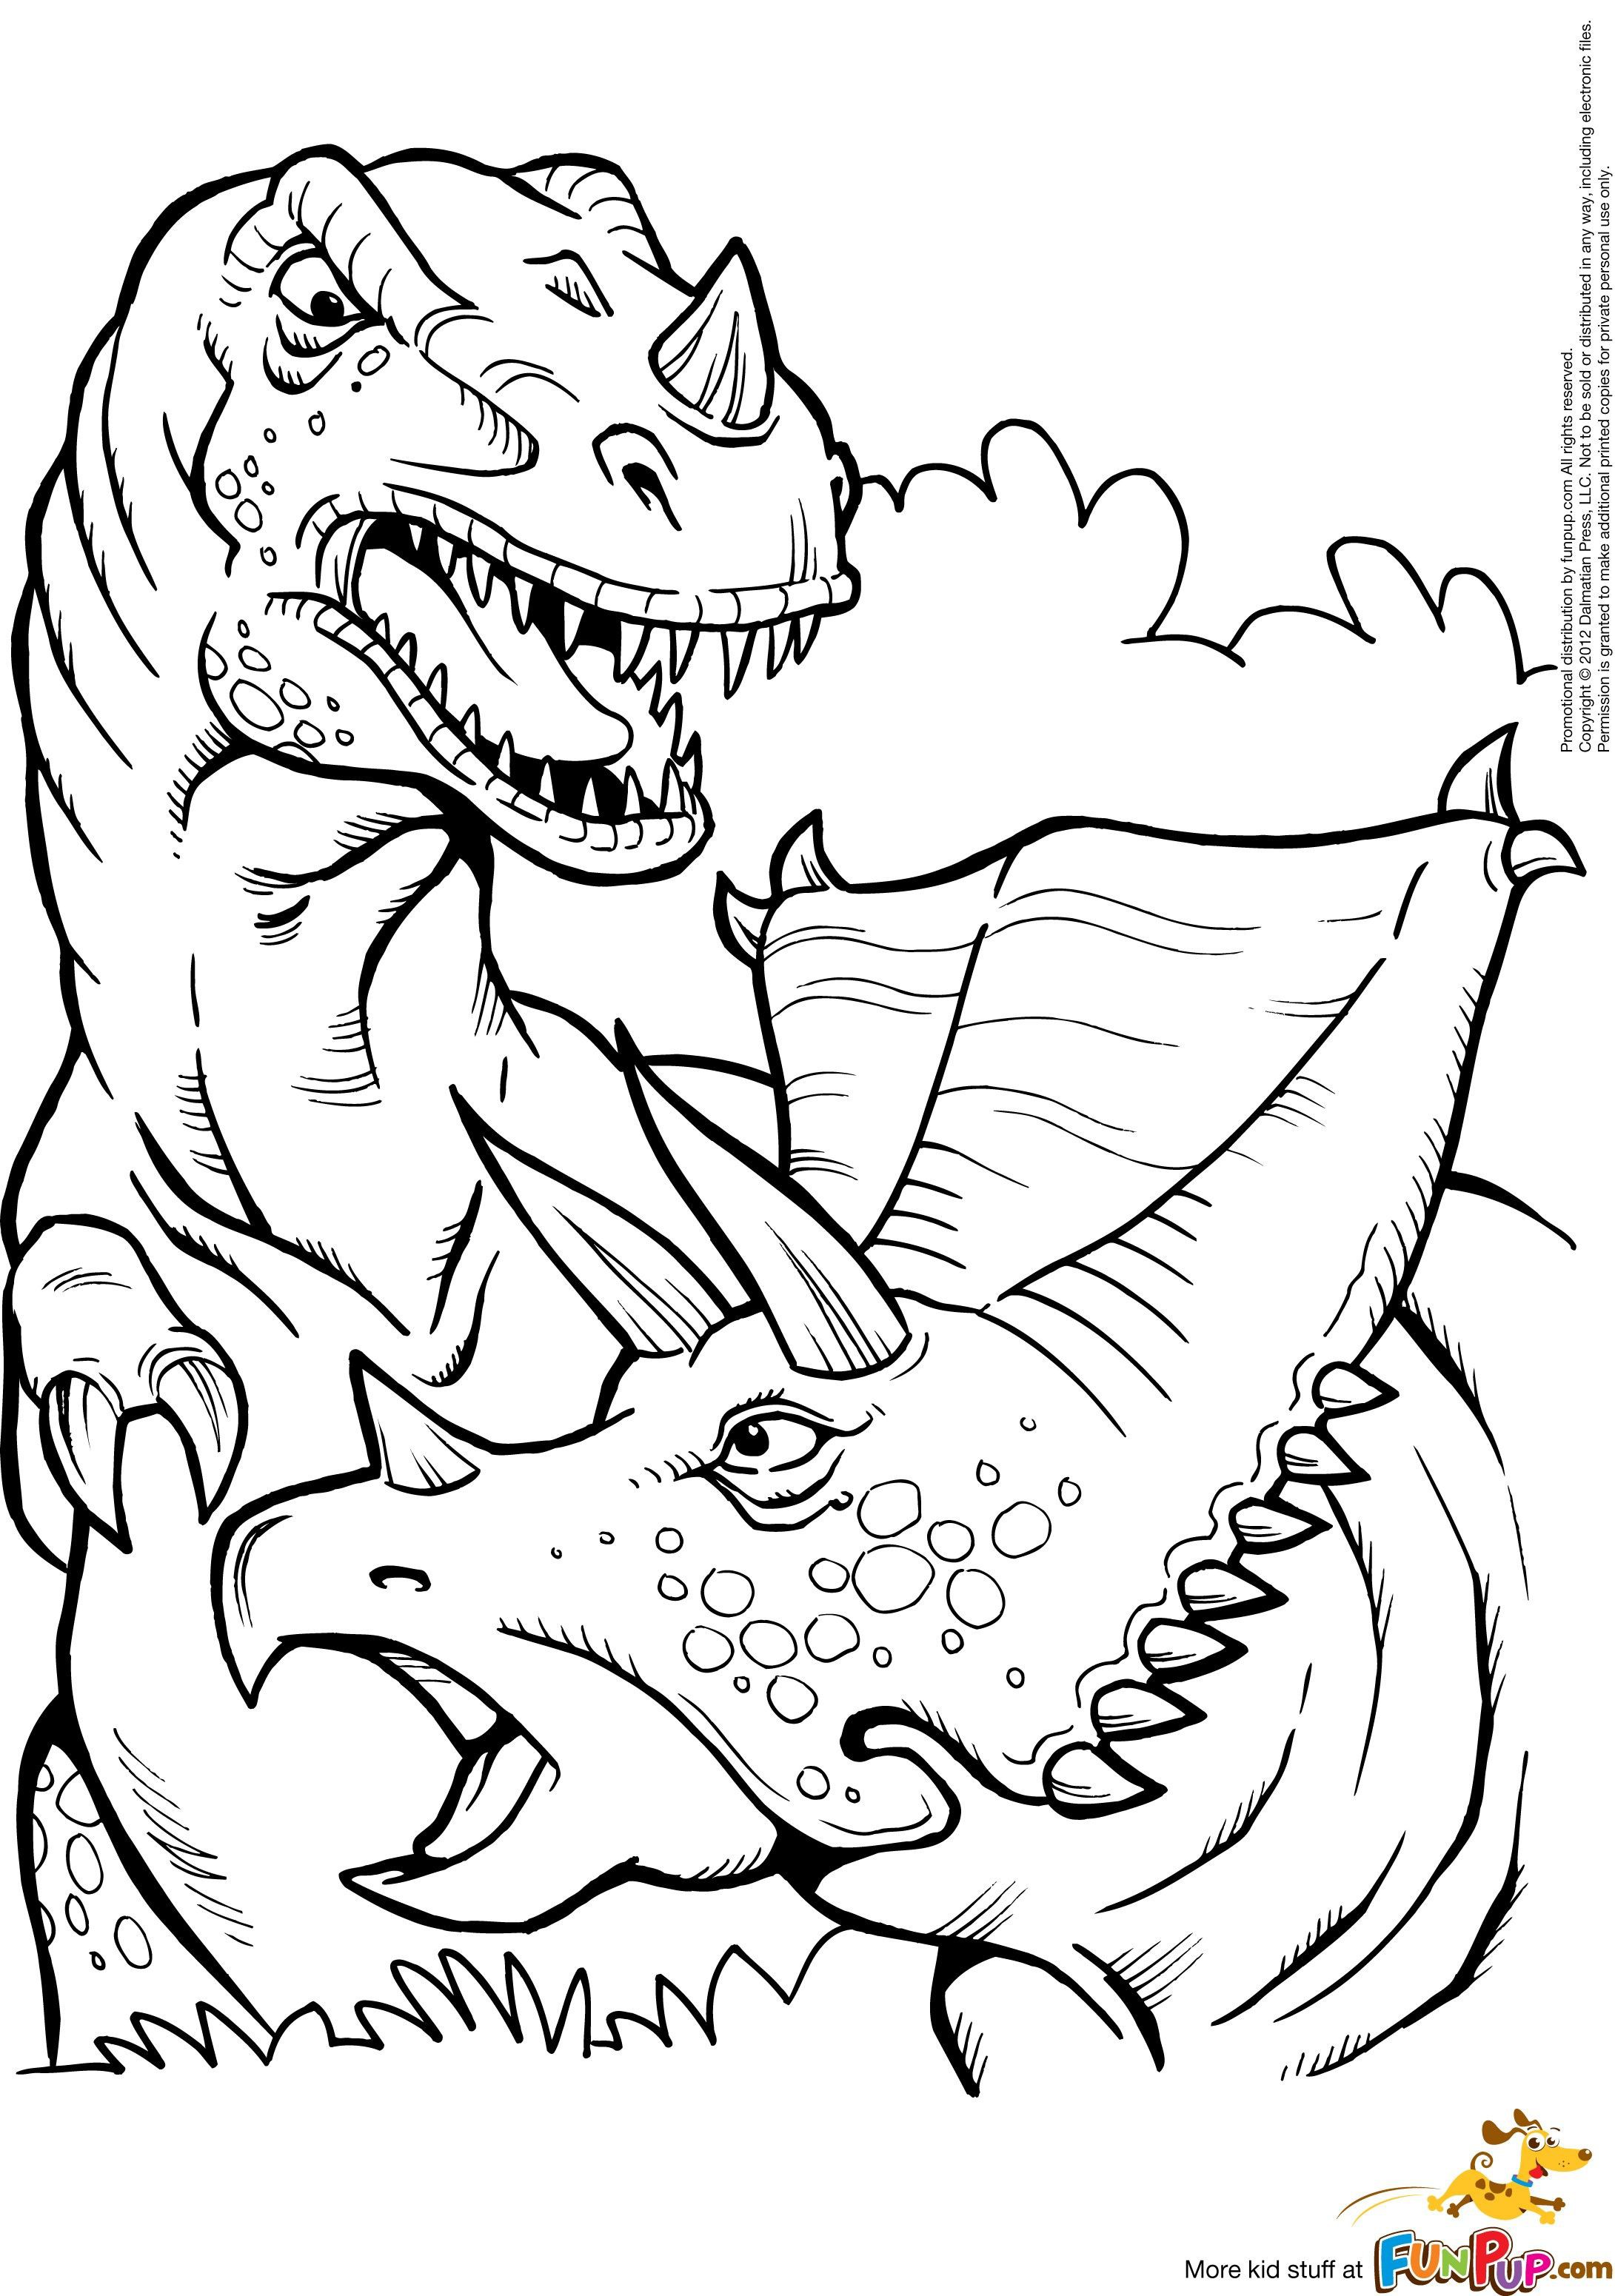 Dinosaurs Coloring Pages Simple